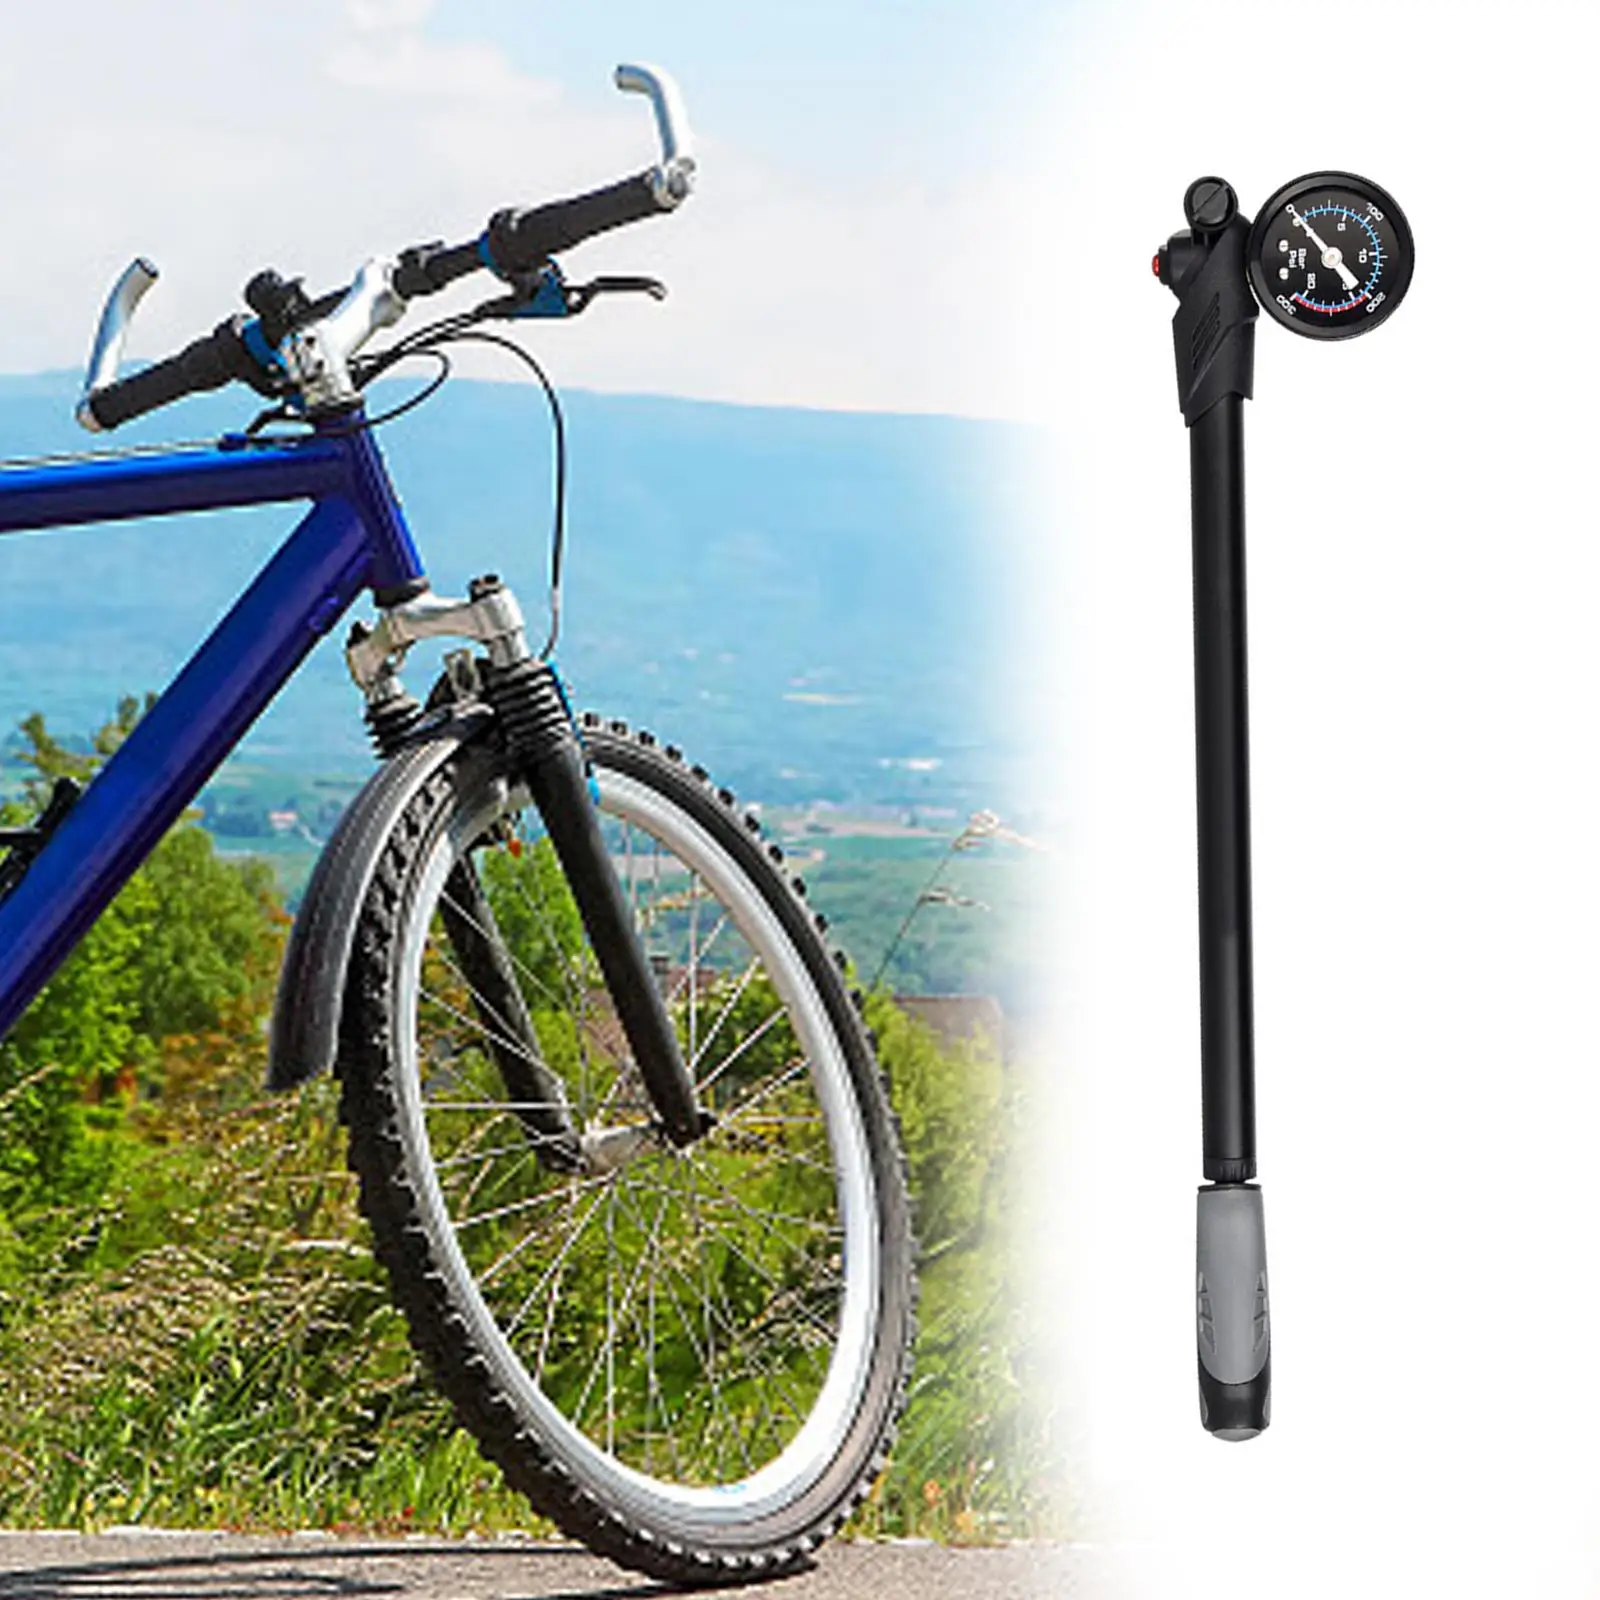 Front Fork Pump with Meter Portable with Dial Gauge 32cm Mini Pump 300PSI Lightweight Shock Pump Front Pump for Cycling Mountain